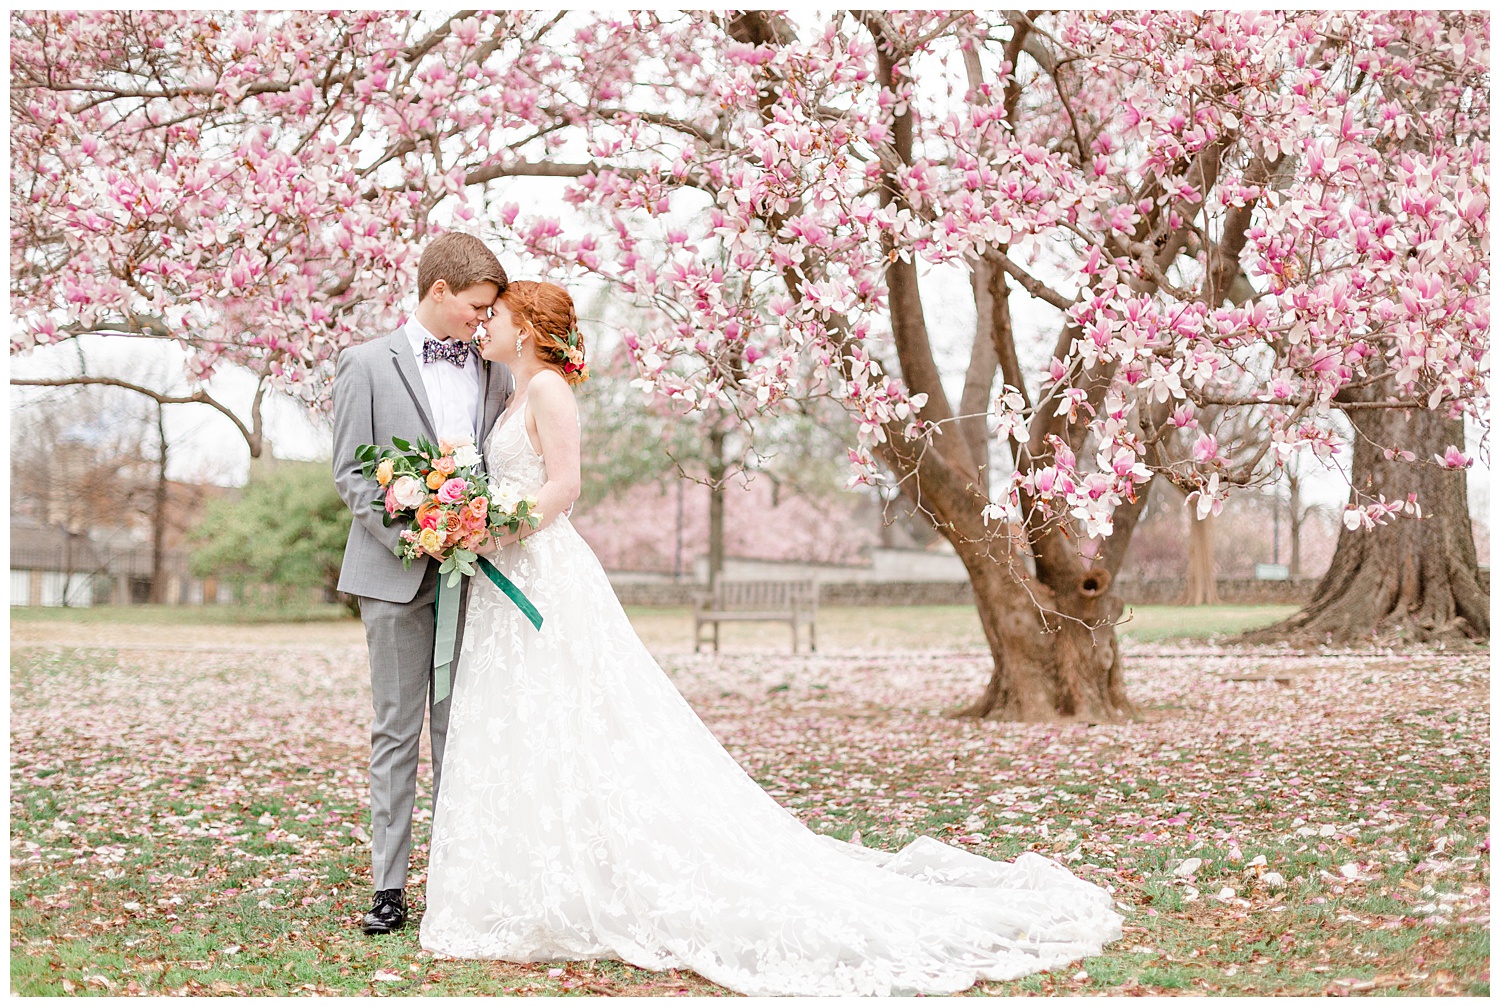 Bride and groom under a cherry blossom tree on a rainy spring wedding day.